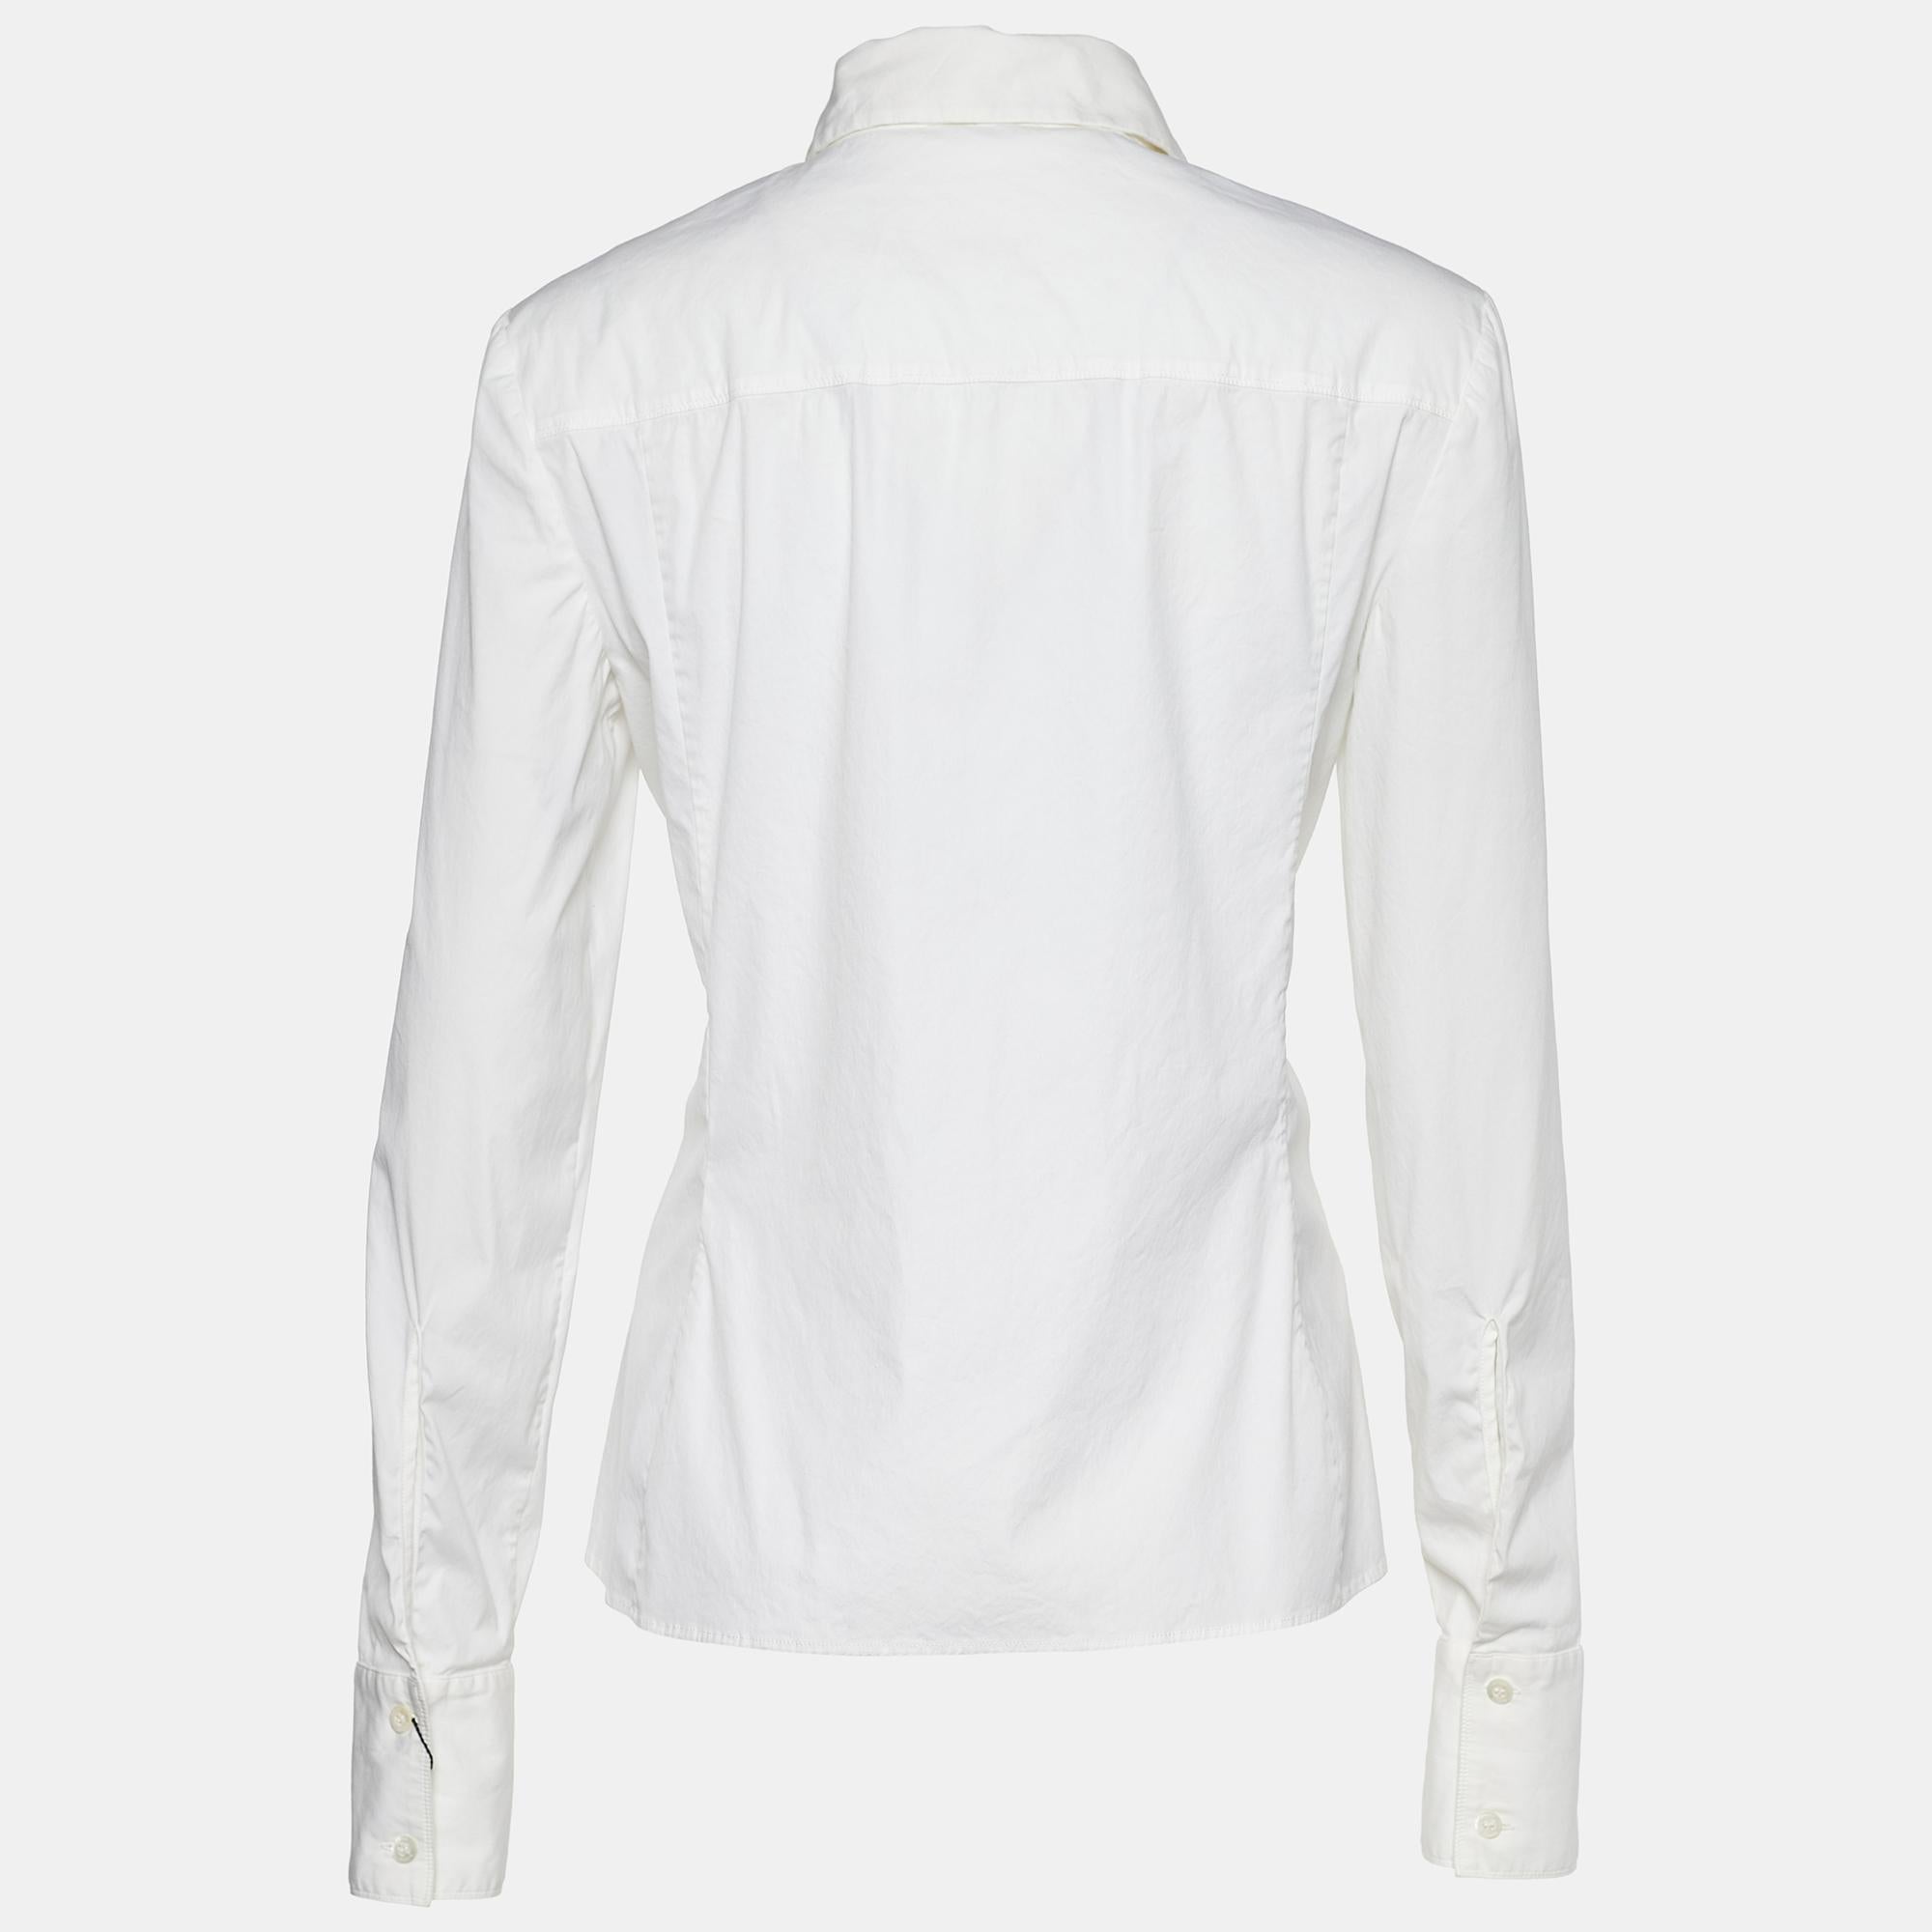 Is your wardrobe even complete if you don't own a classic white shirt like this? Thankfully, Gucci comes to your rescue! This Gucci shirt is fashioned in white stretch cotton, which is highlighted with lace-up detailing on the front. It has long